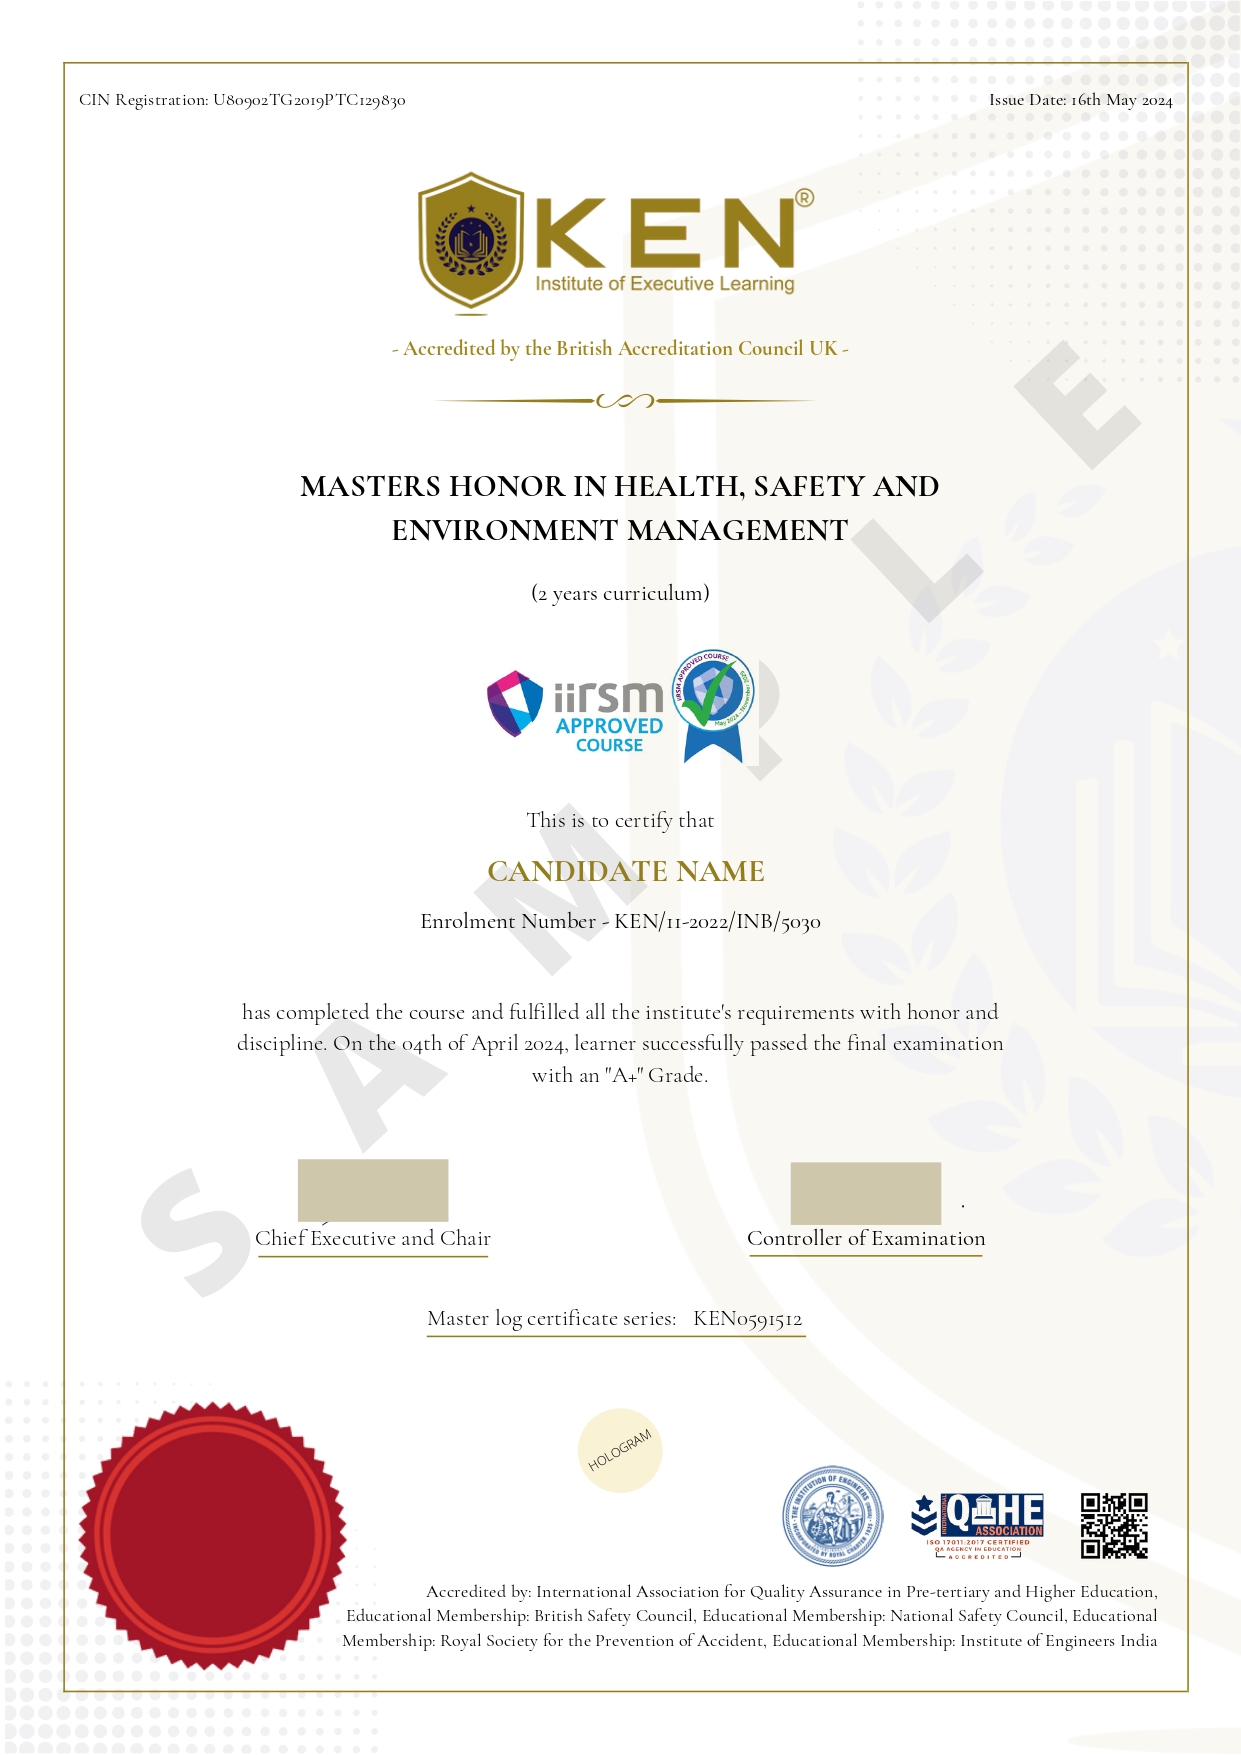 Master Honor in Health Safety and Environment Management